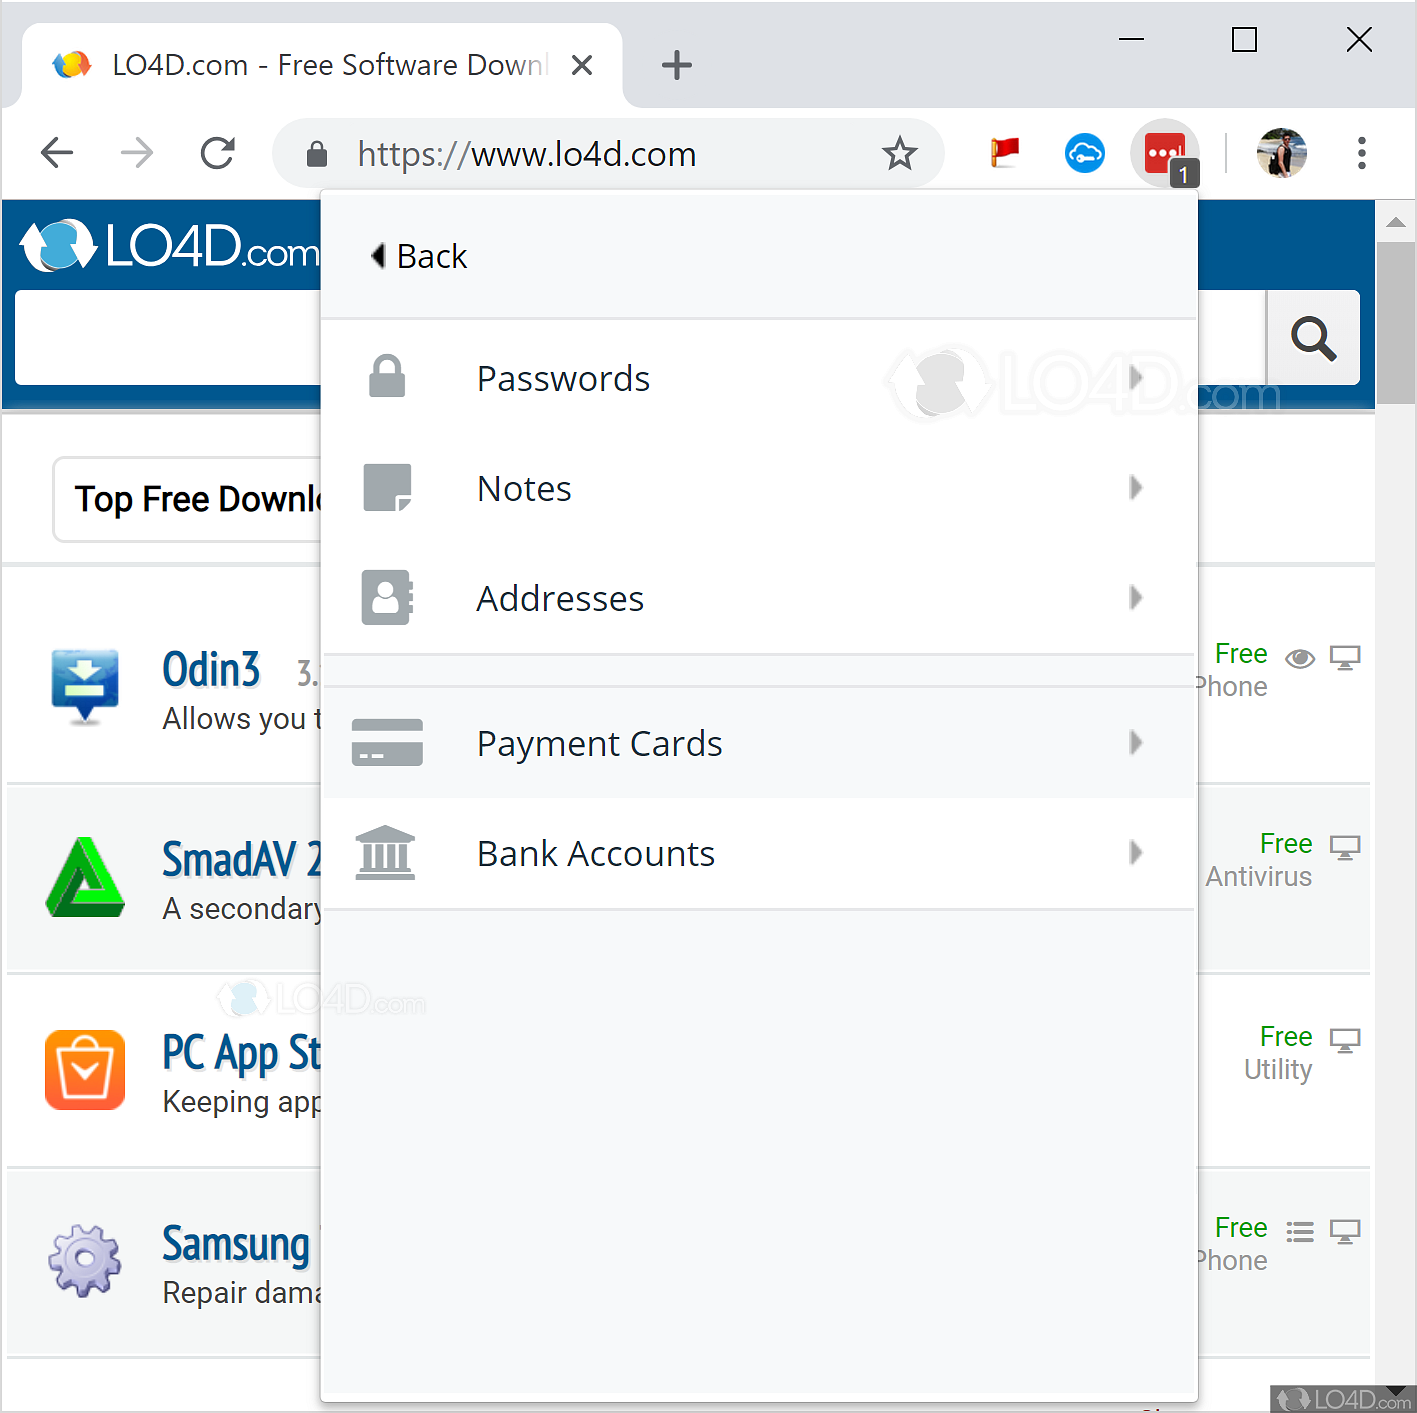 download the new version LastPass Password Manager 4.117